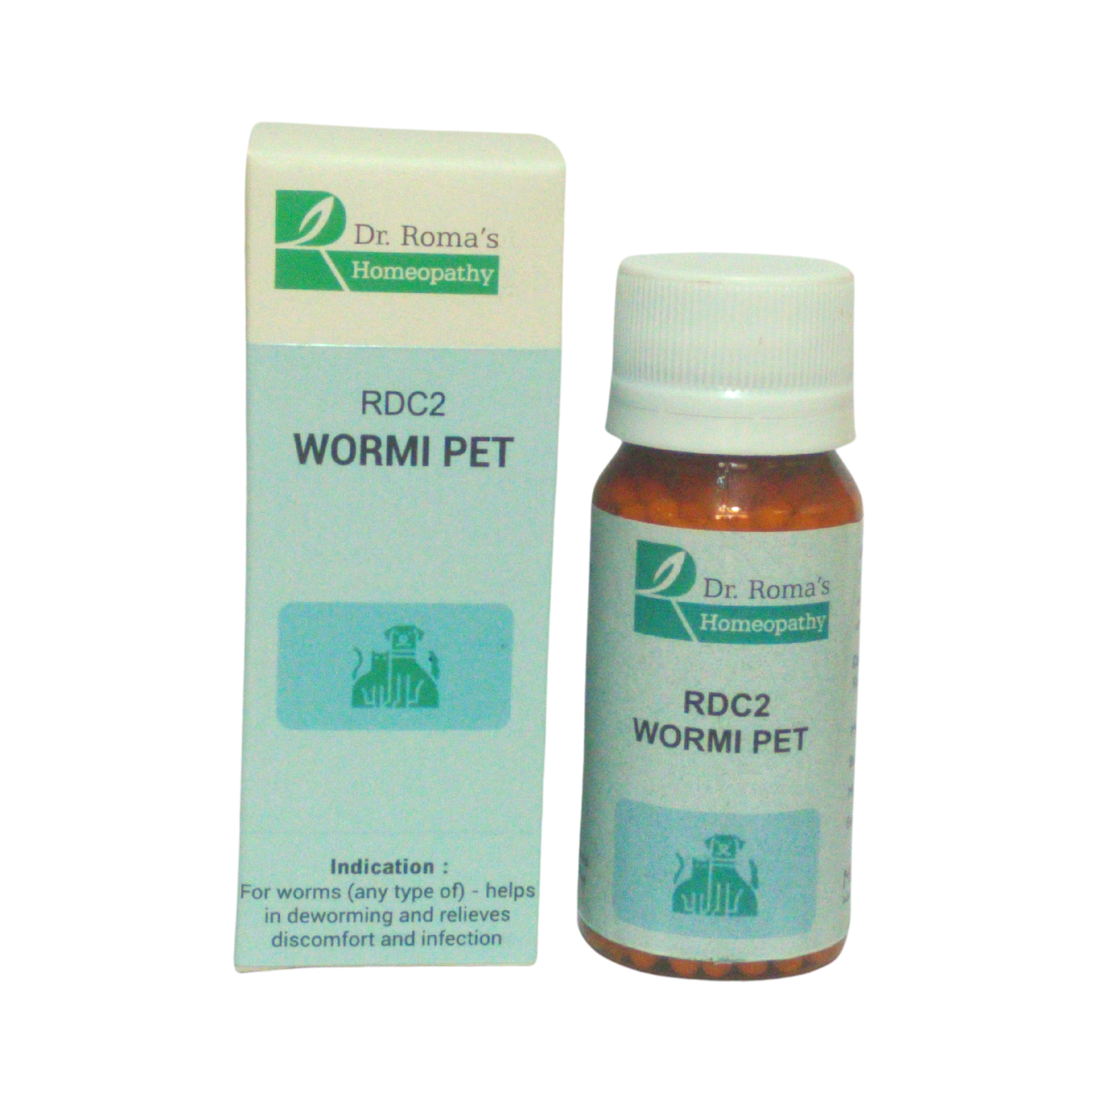 WORMI PET for worms - RDC 2